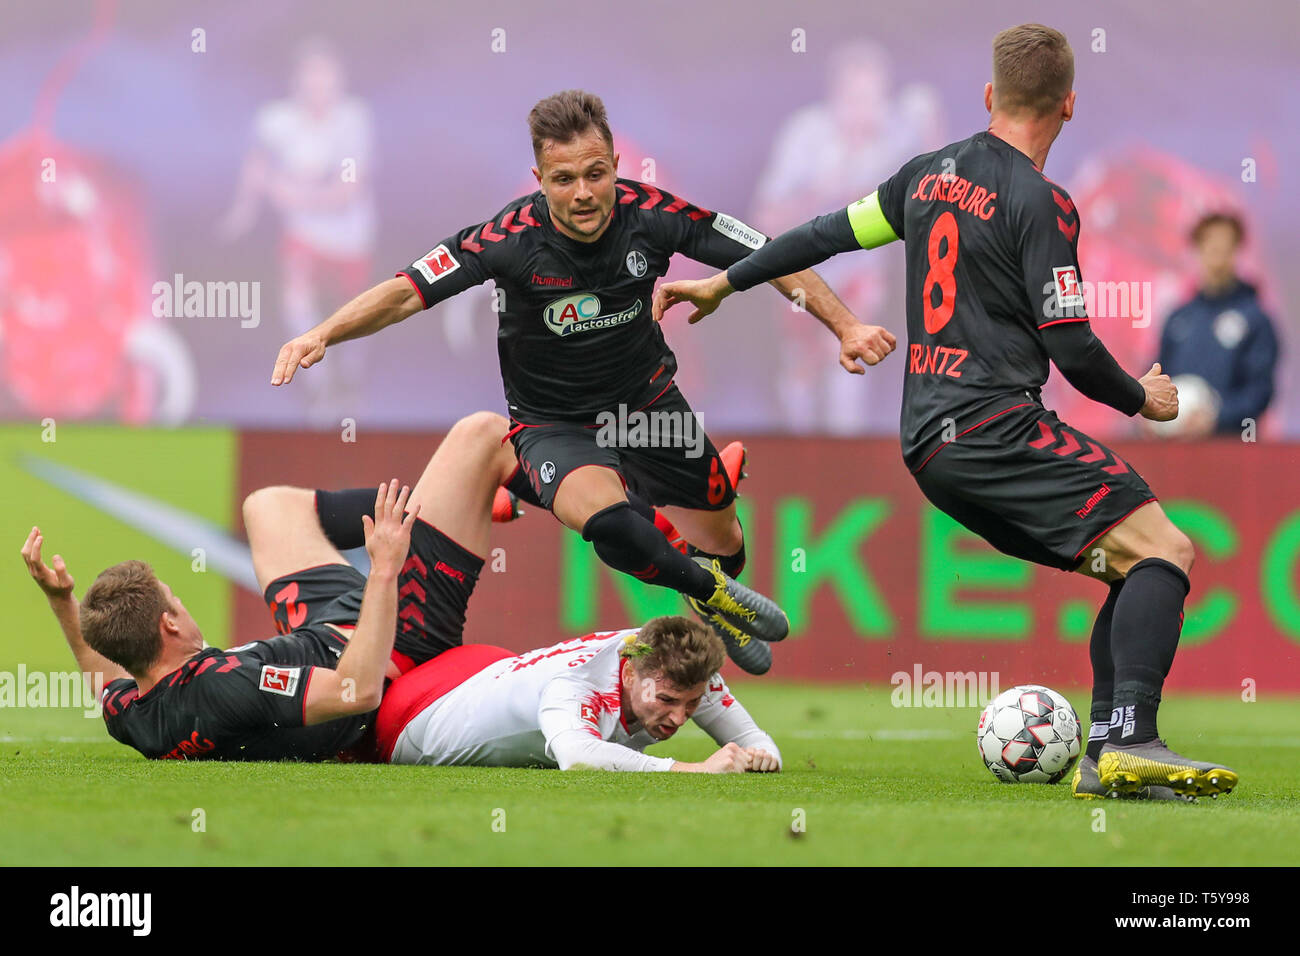 Leipzig, Germany. 27th Apr, 2019. Soccer: Bundesliga, 31st matchday, RB Leipzig - SC Freiburg in der Red-Bull-Arena Leipzig. Leipzig's Timo Werner (M) is stopped rudely by Freiburg's Dominique Heintz (l) and Freiburg's Amir Abrashi (r). Mike Frantz on the right. Credit: Jan Woitas/dpa-Zentralbild/dpa - IMPORTANT NOTE: In accordance with the requirements of the DFL Deutsche Fußball Liga or the DFB Deutscher Fußball-Bund, it is prohibited to use or have used photographs taken in the stadium and/or the match in the form of sequence images and/or video-like photo sequences./dpa/Alamy Live News Stock Photo